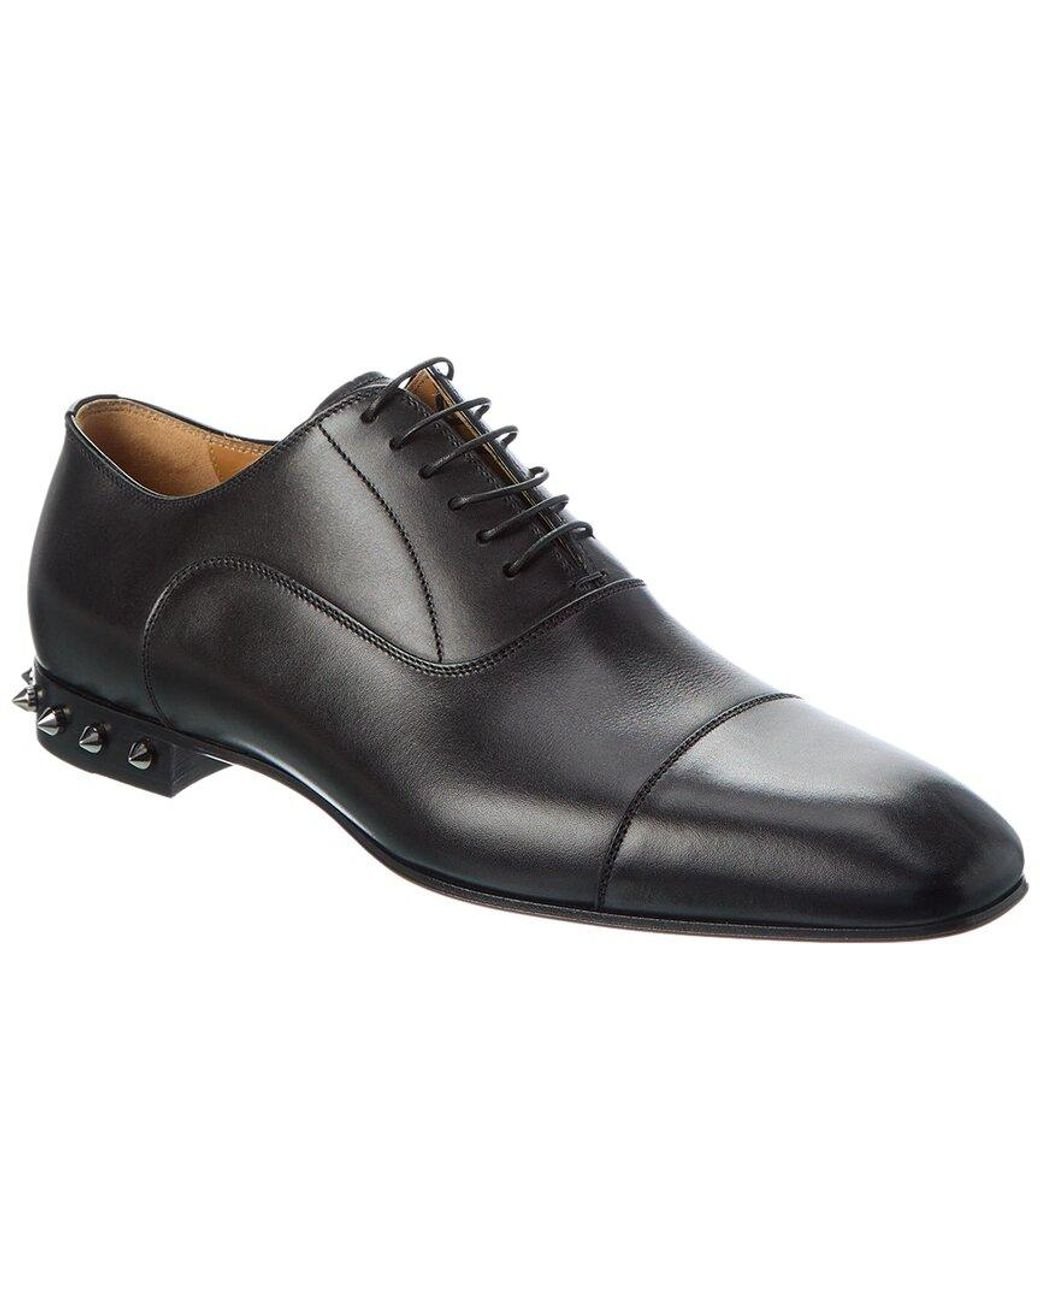 Greggo - Lace-up shoes - Patent calf leather - Black - Christian